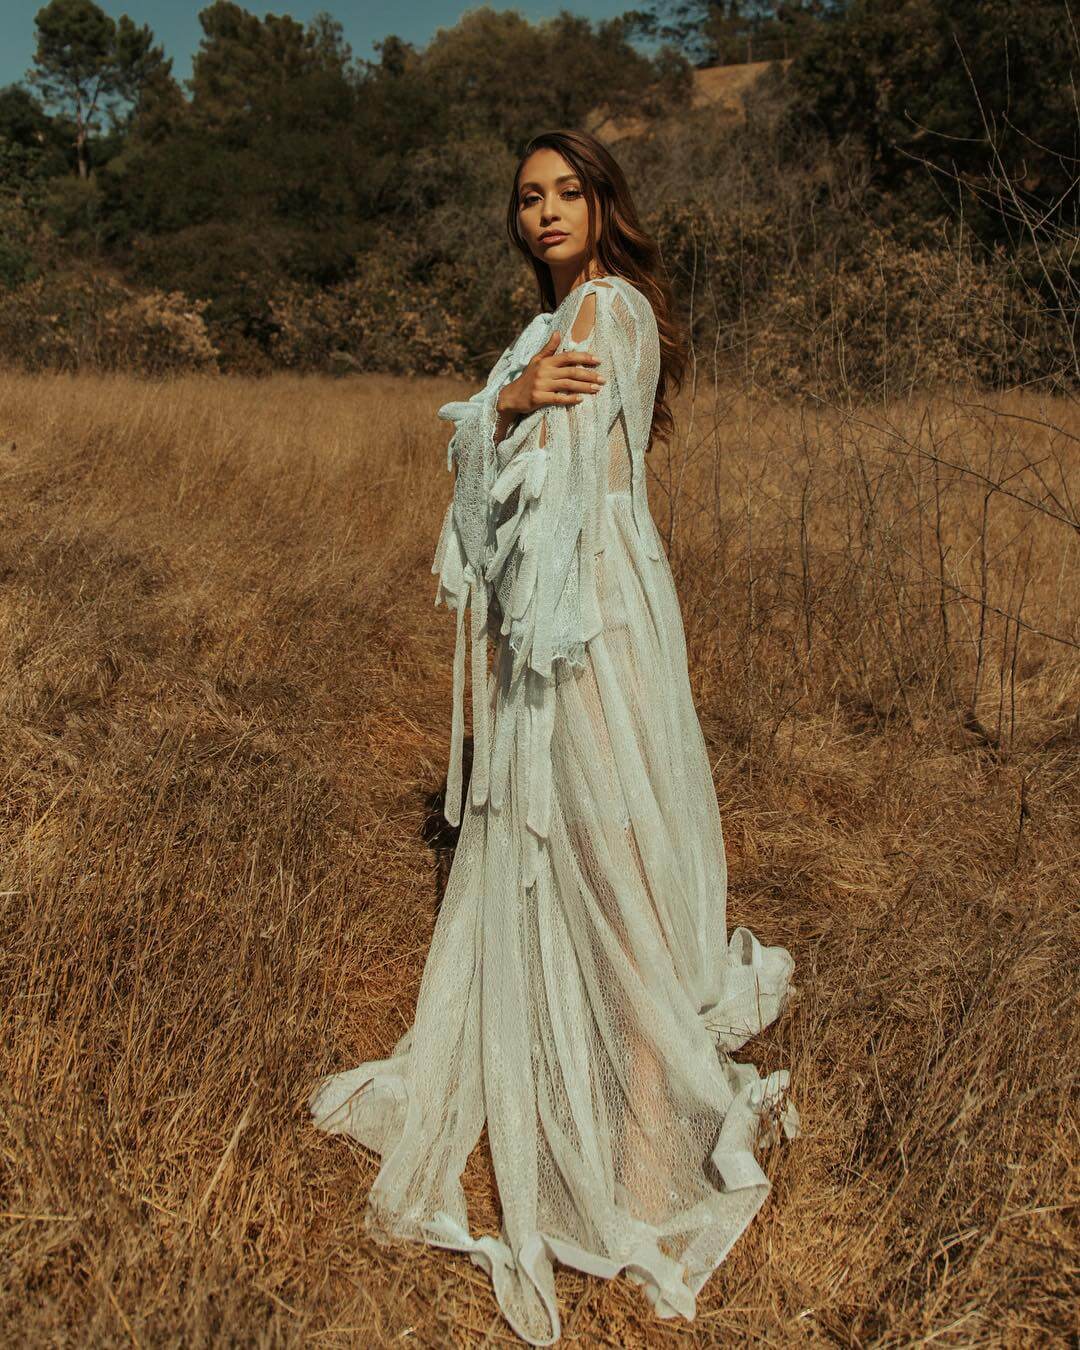 Lindsey Morgan - Soft Girl Glam in a Flowy Gown